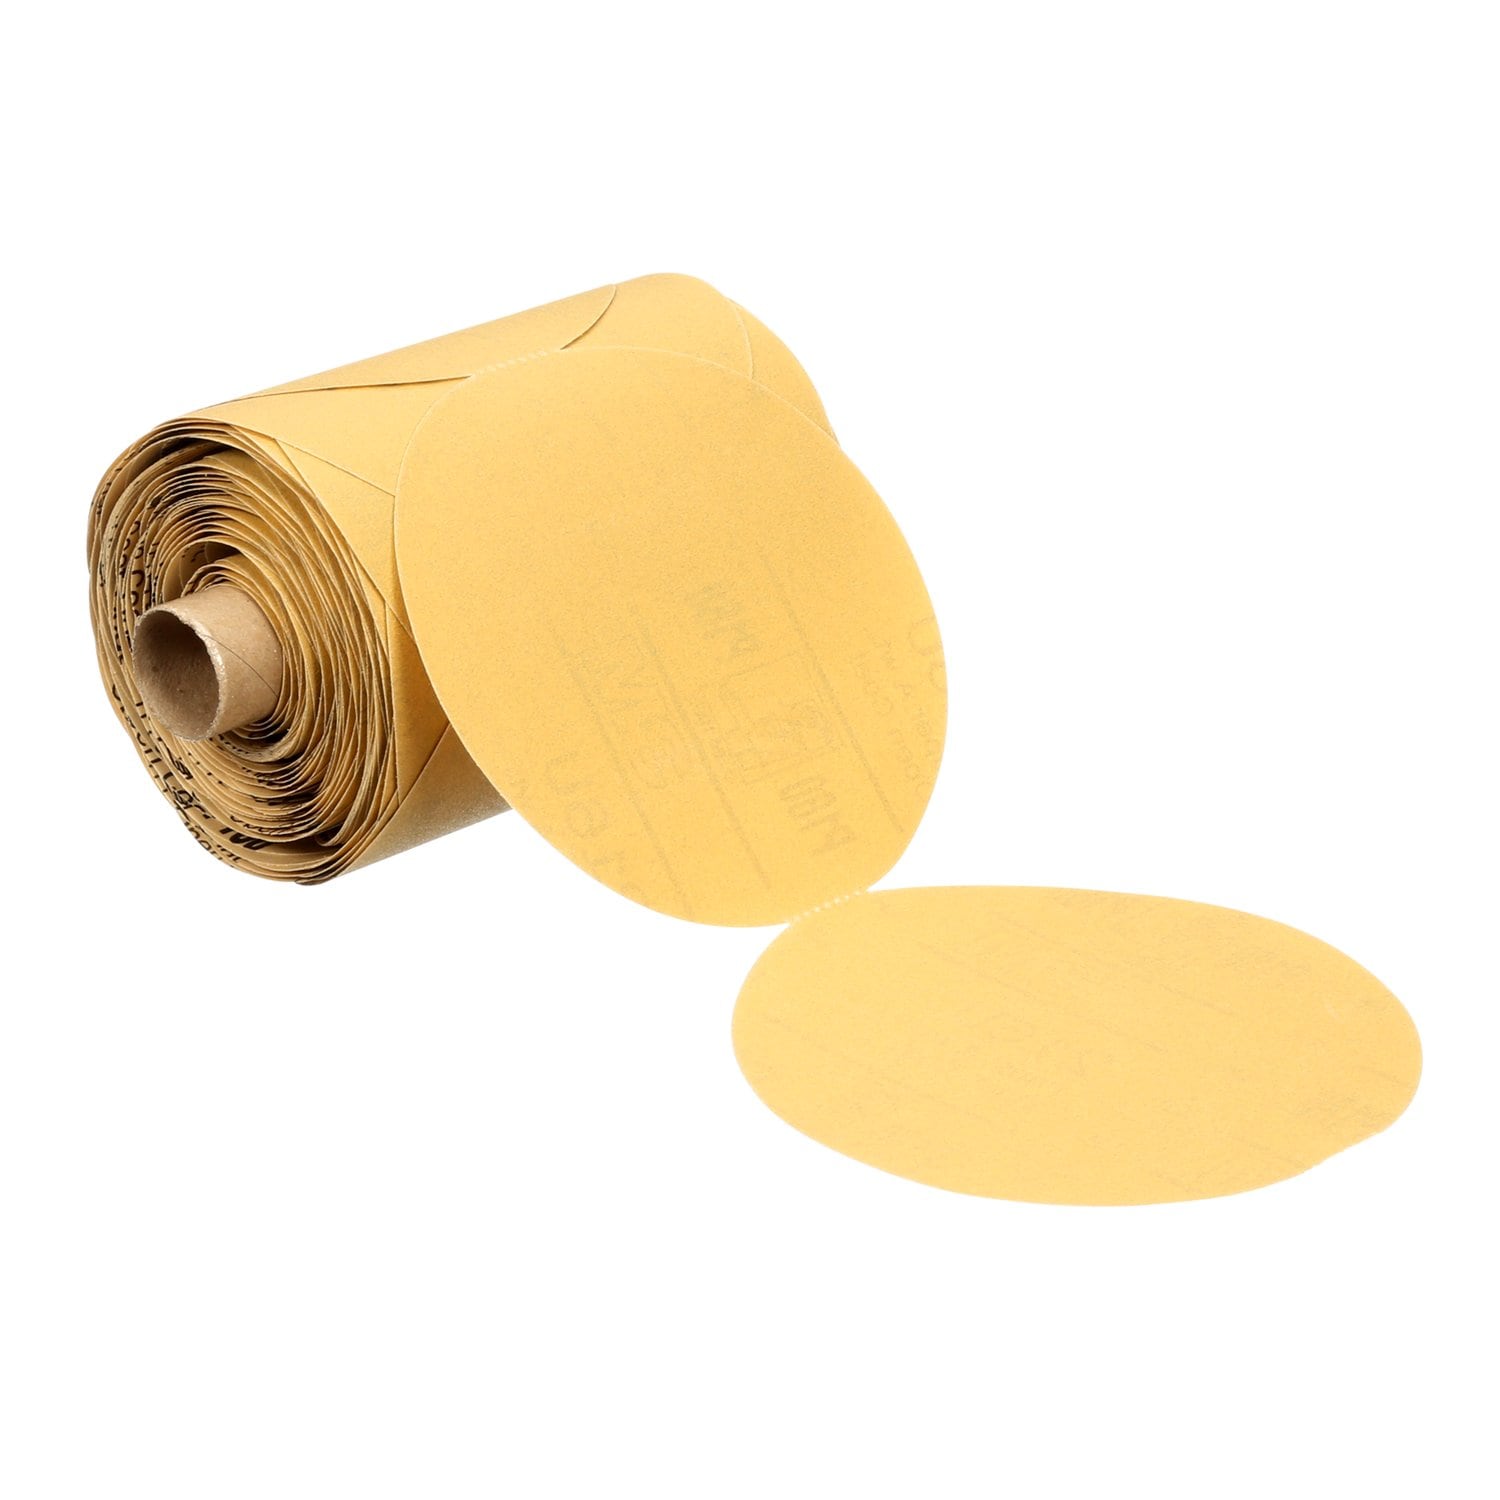 7100093554 - 3M Stikit Gold Paper Disc Roll 216U, P600 A-weight, Linered, Config